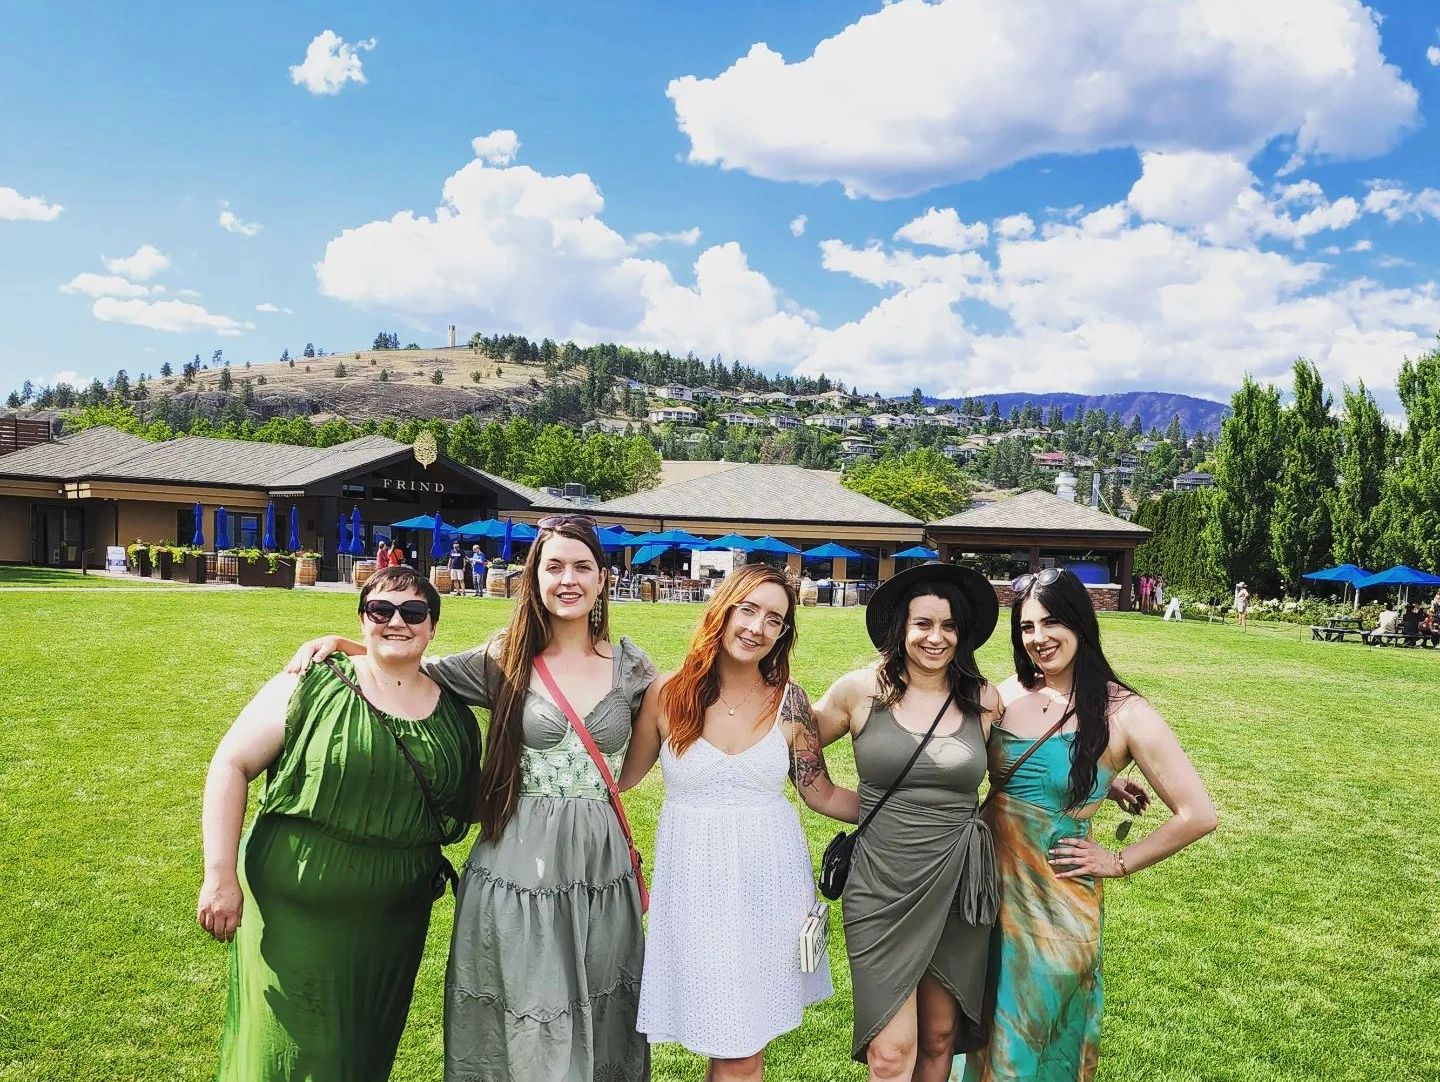 A group of 5 women standing in front of Frind Winery.